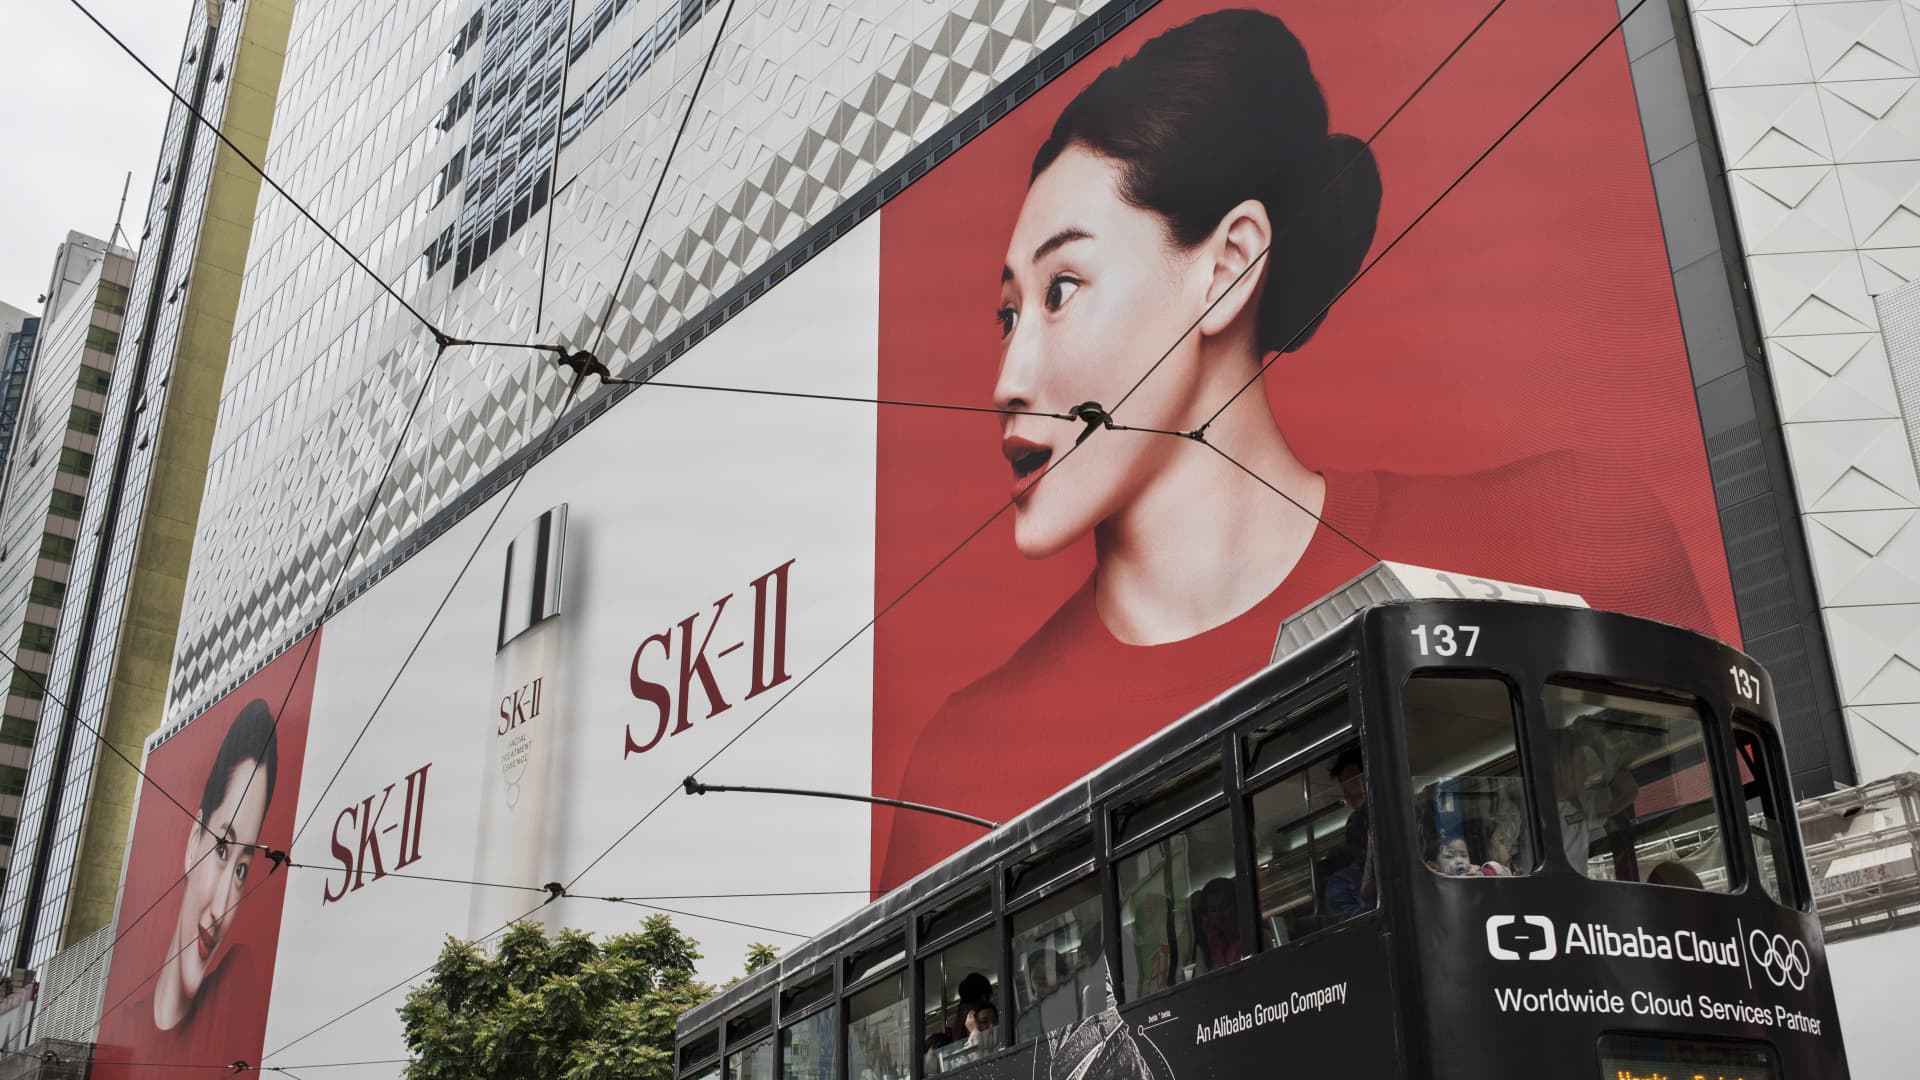 Procter & Gamble SK-II beauty sales hurt by Japan wastewater release